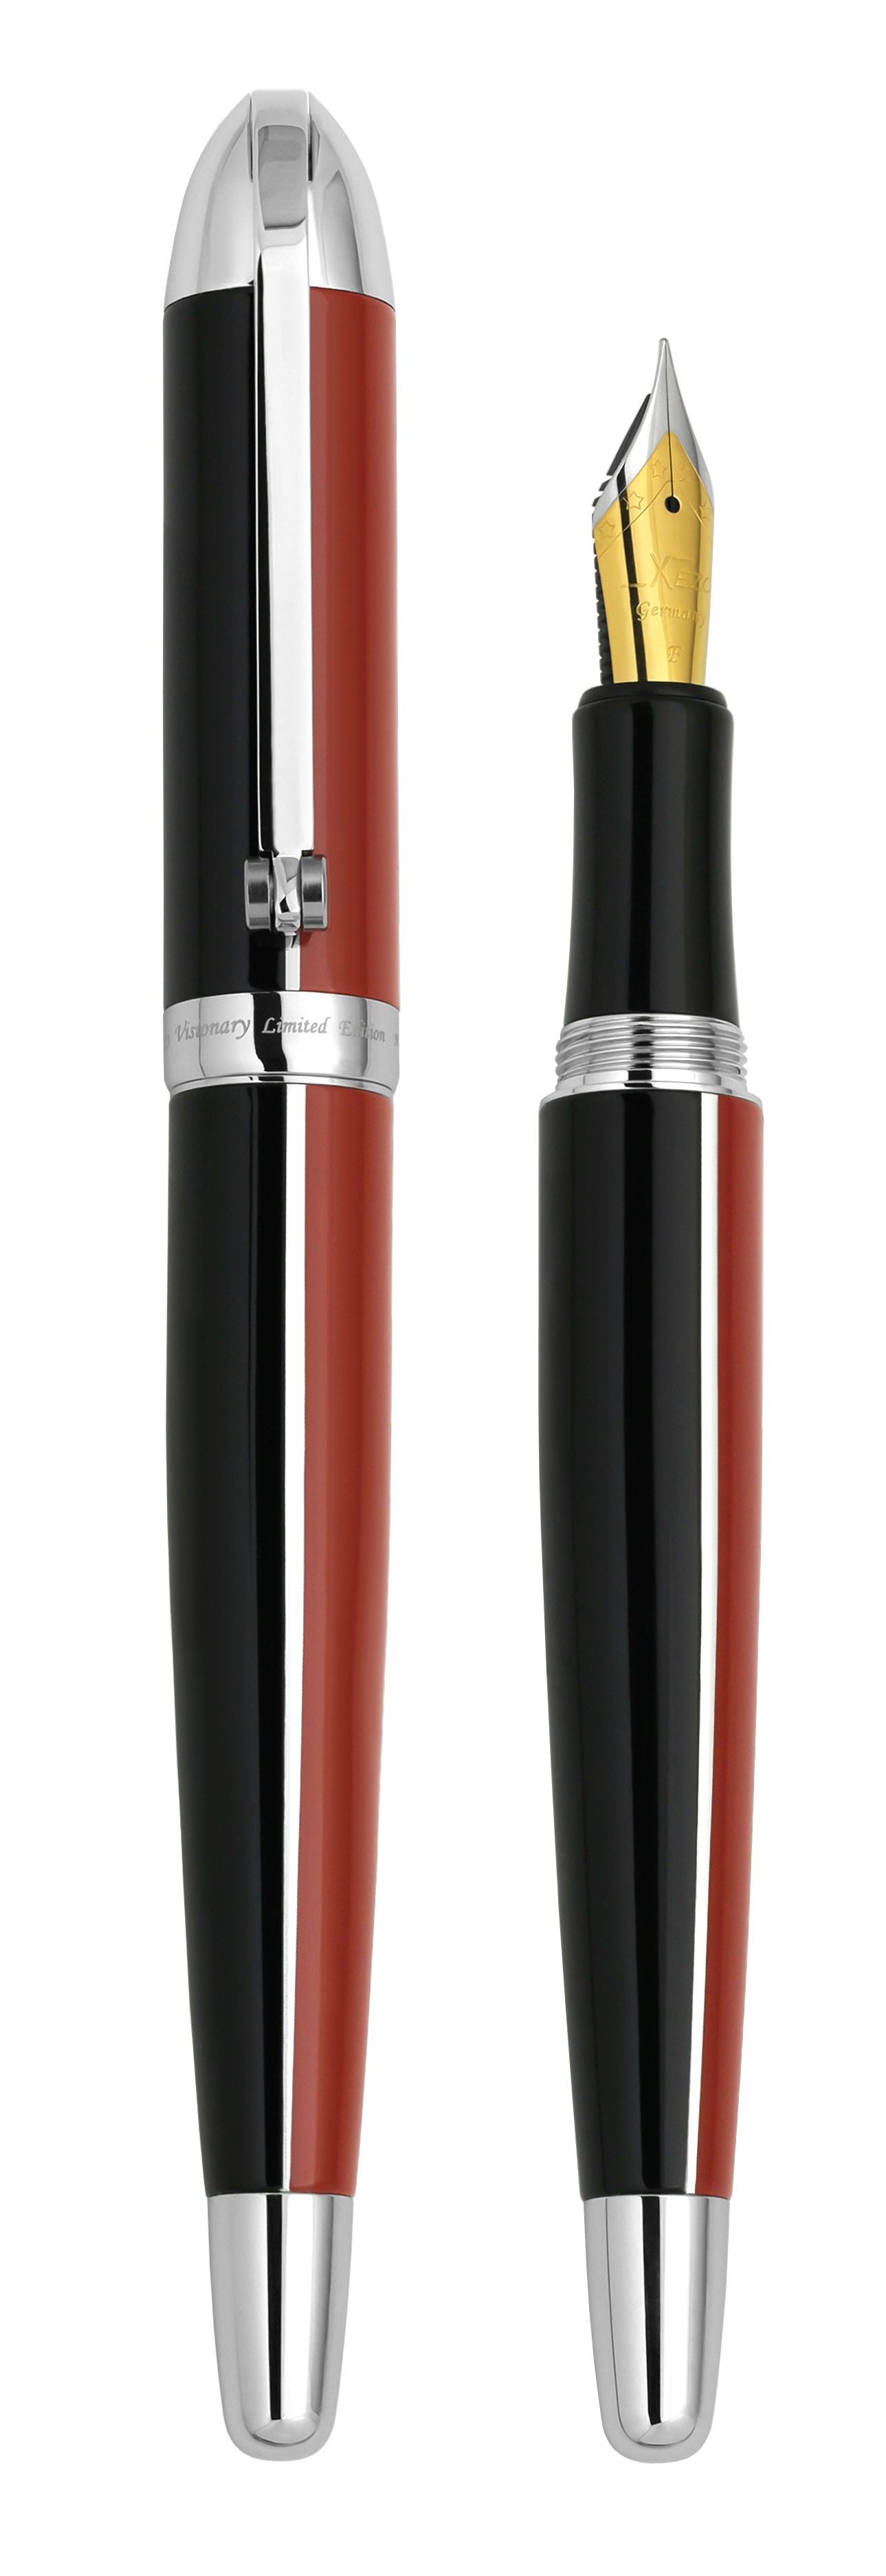 Xezo - Vertical view of two Visionary Red/Black F fountain pens. The pen on the left is capped, and the pen on the right has no cap